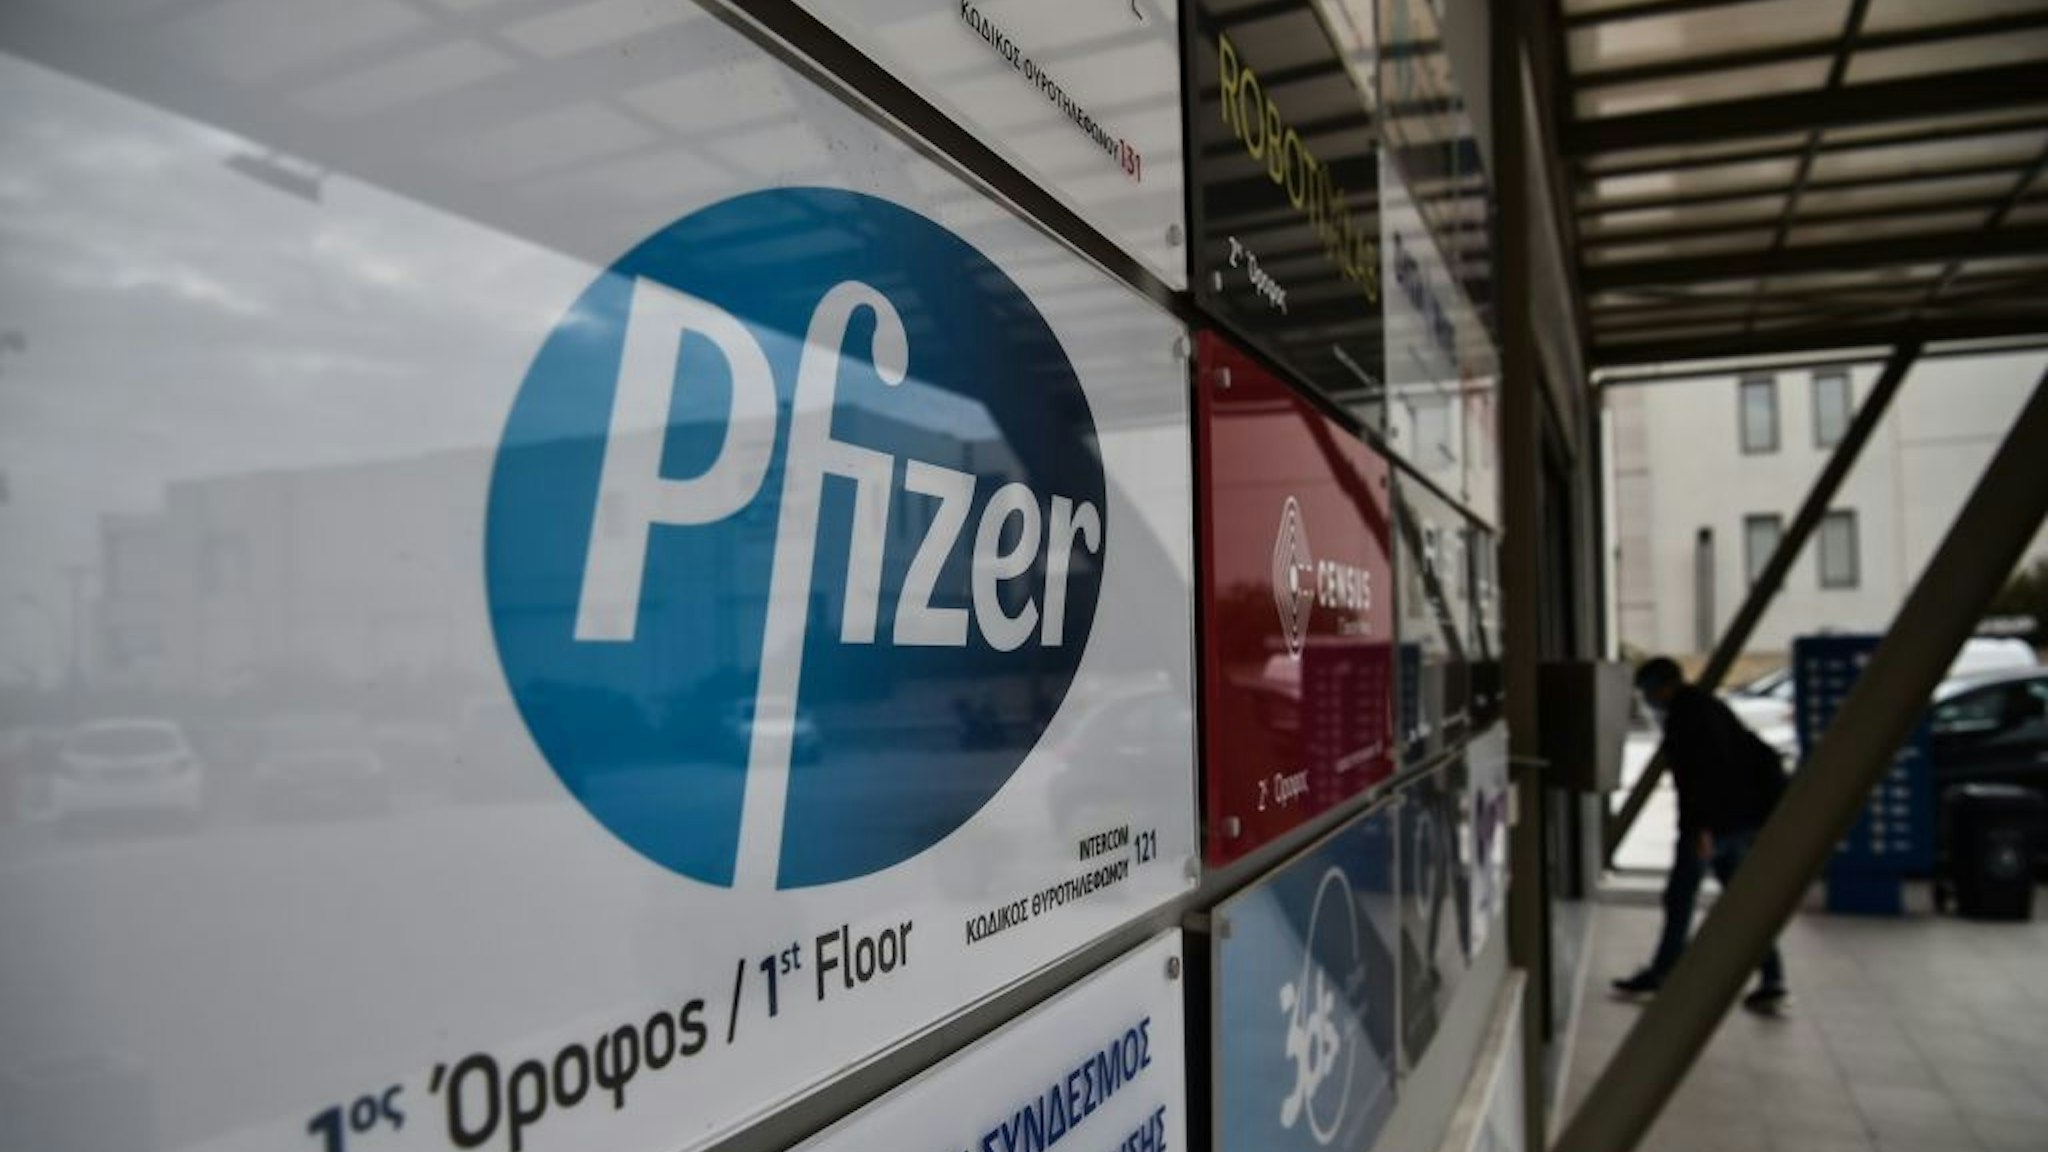 A man entry at the building where Pfizer's office located in Thessaloniki on November 10, 2020. - Pfizer stock surged higher on November 9, 2020 prior to the opening of Wall Street trading after the company announced its vaccine is "90 percent effective" against Covid-19 infections. The news cheered markets worldwide, especially as coronavirus cases are spiking, forcing millions of people back into lockdown. (Photo by Sakis MITROLIDIS / AFP) (Photo by SAKIS MITROLIDIS/AFP via Getty Images)